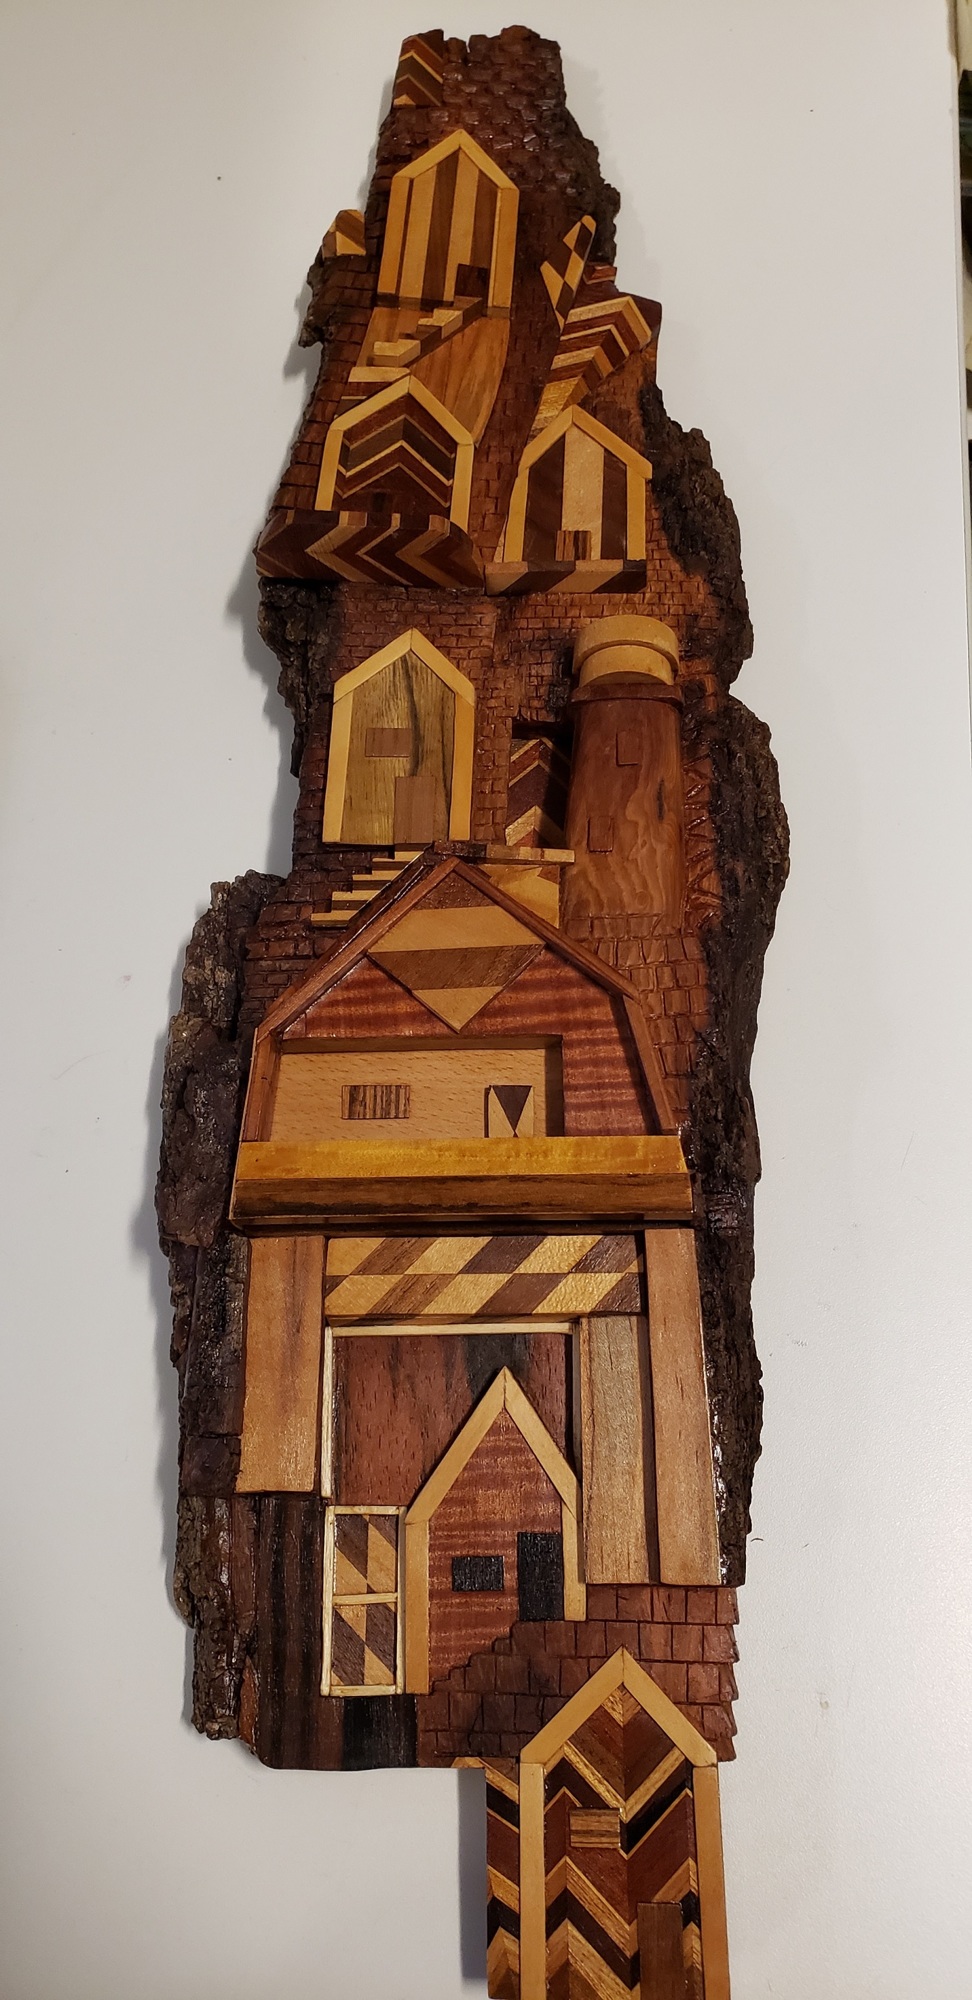 Wood carving art featuring lighthouses. Courtesy photo